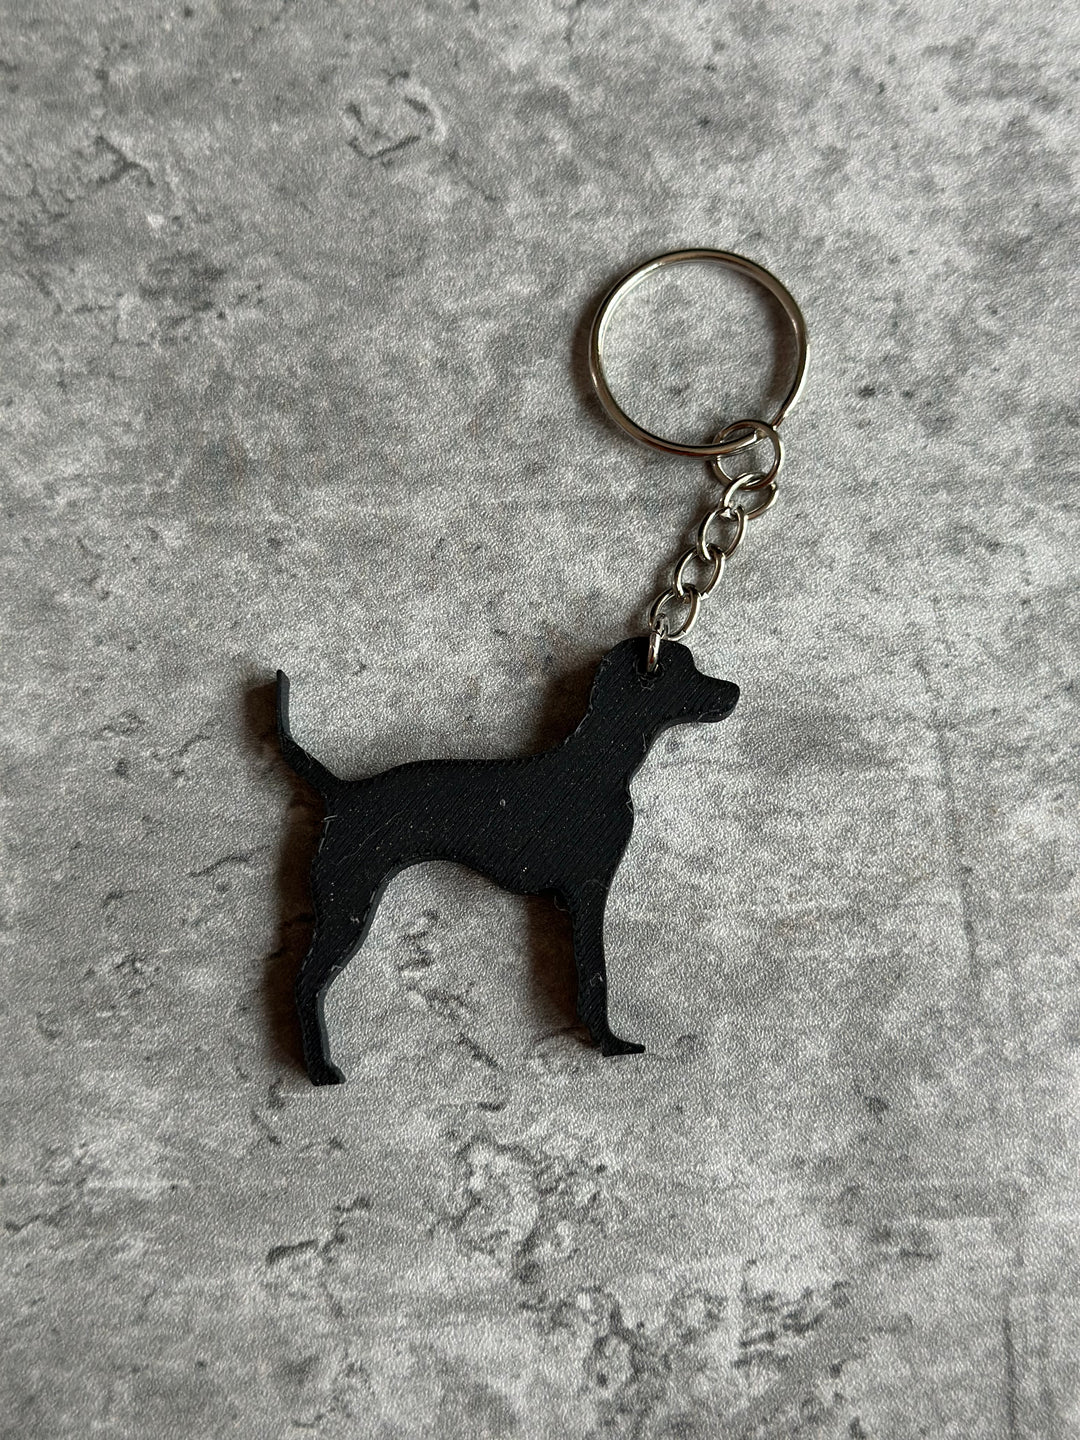 English foxhound Dog Keyring Stl File | 3D Printed | Unique Personalised Gifts